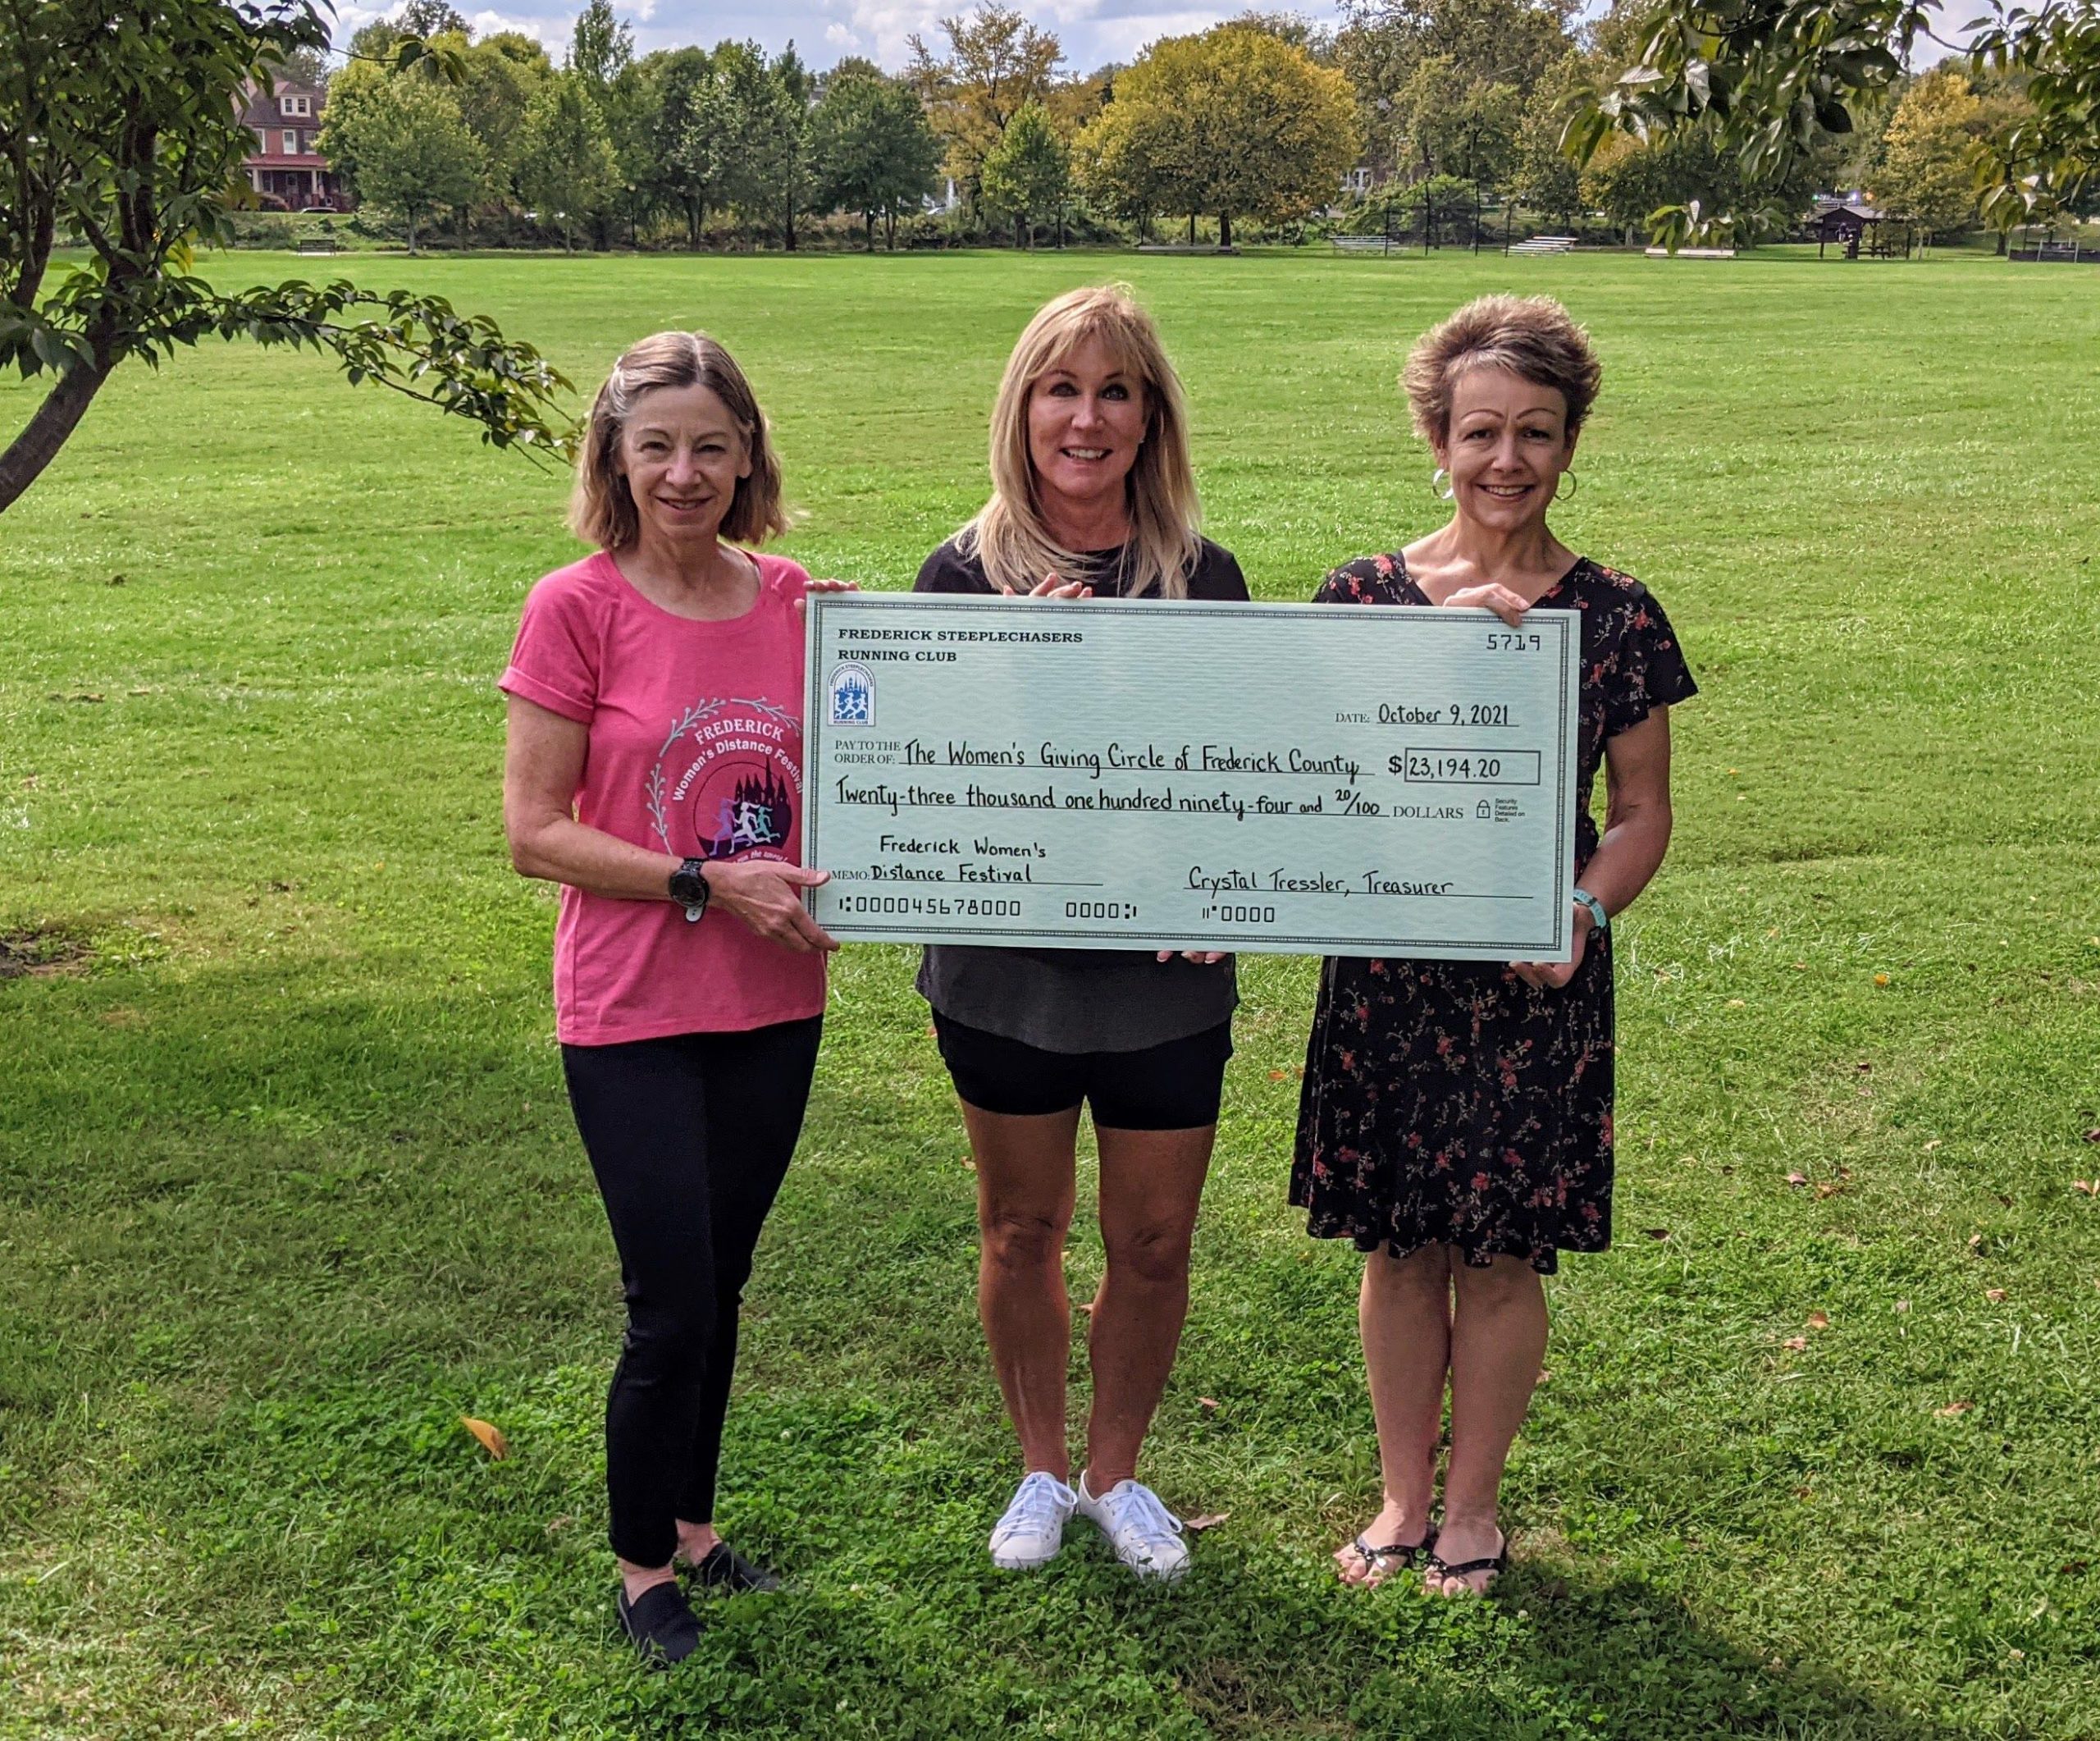 Left to Right, Harriet Langlois, Race Director; Linda Roth, Chair, Women's Giving Circle; Heidi Novak, President, Frederick Steeplechasers Running Club